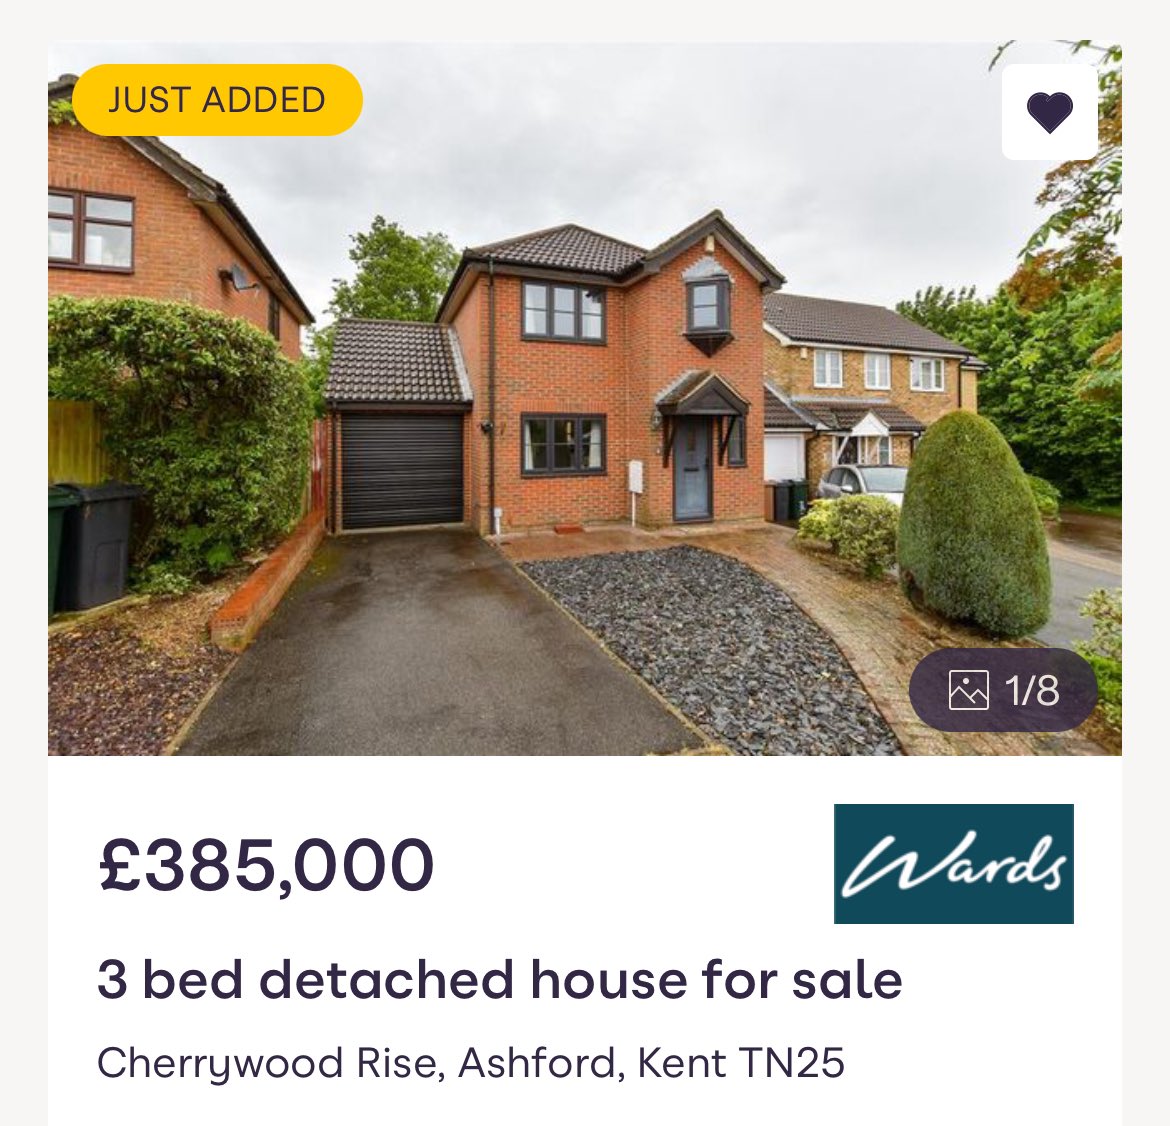 @moving_charlie do you want to tell them what they are doing wrong?
@sandersonsuk overpriced the below house at £400k before reducing it to £380k. After months seller changed to @wardsofkent who are overpricing it again at £385k while it was not selling for months at £380k 😂